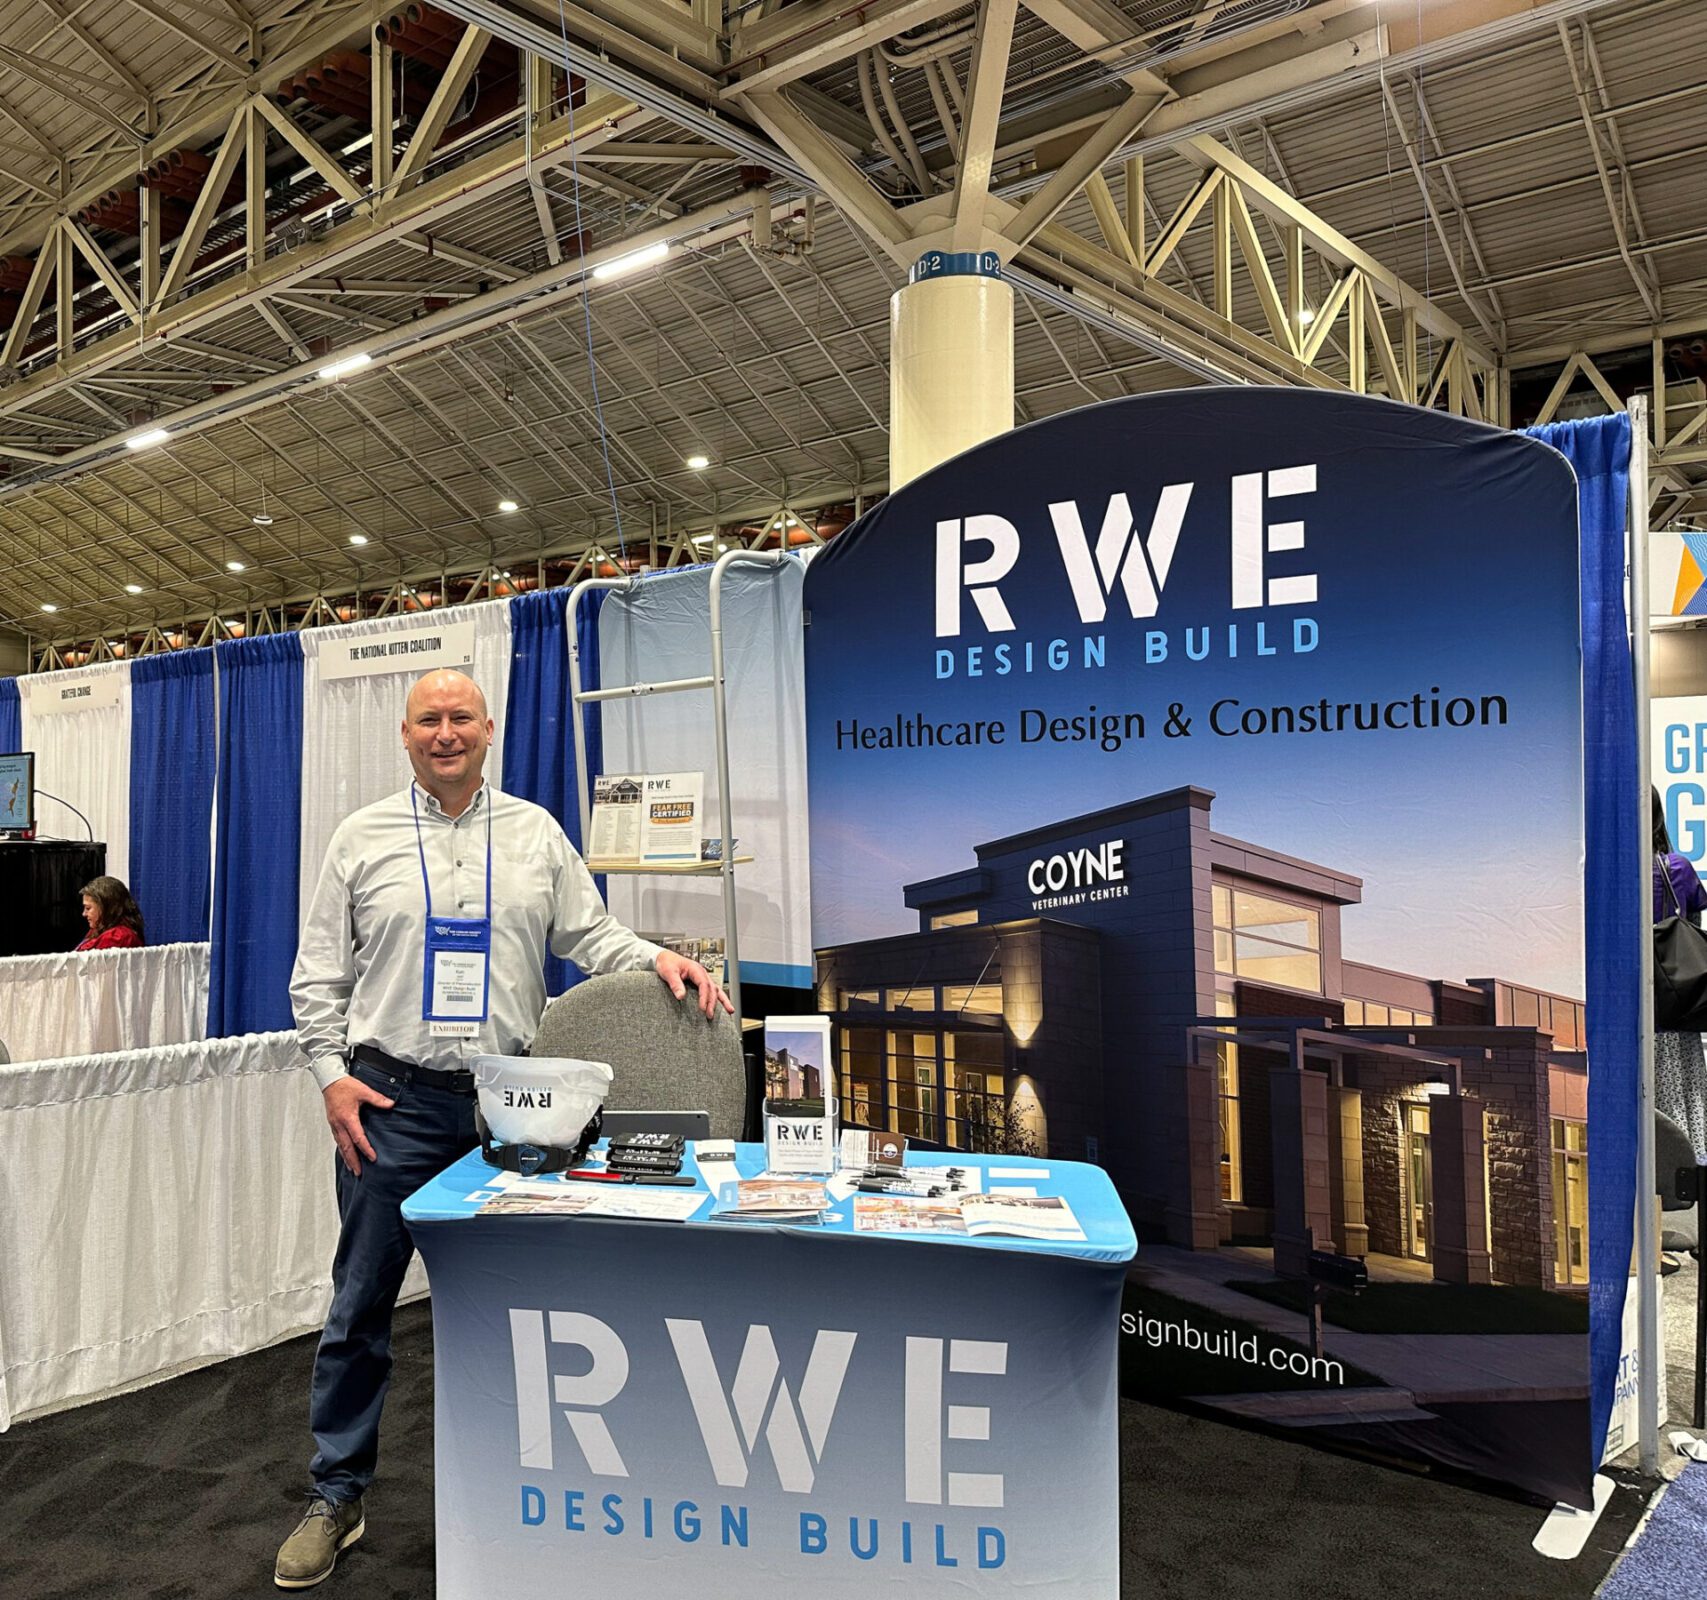 This image showcases an RWE employee working their trade show booth.